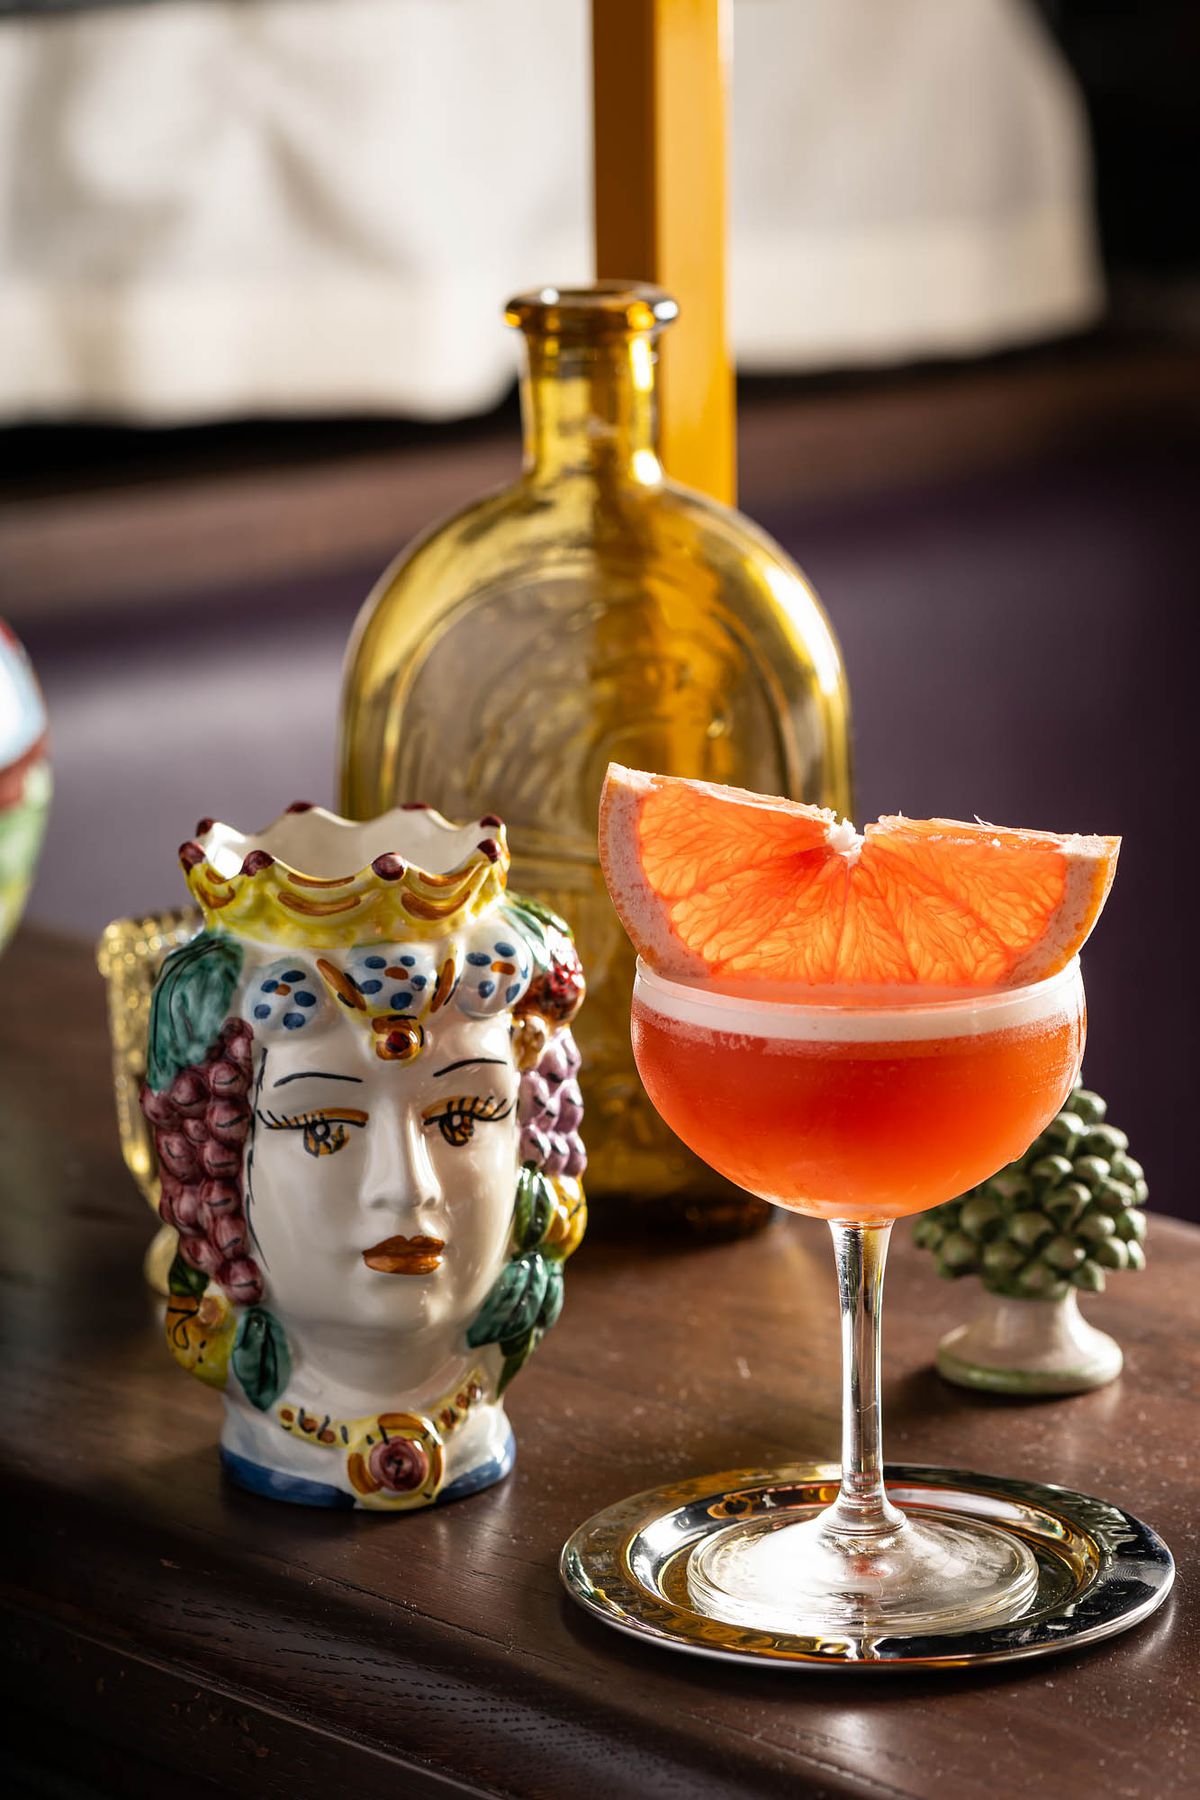 An orange-colored cocktail with a grapefruit slice next to a ceramic doll at Donna’s restaurant.